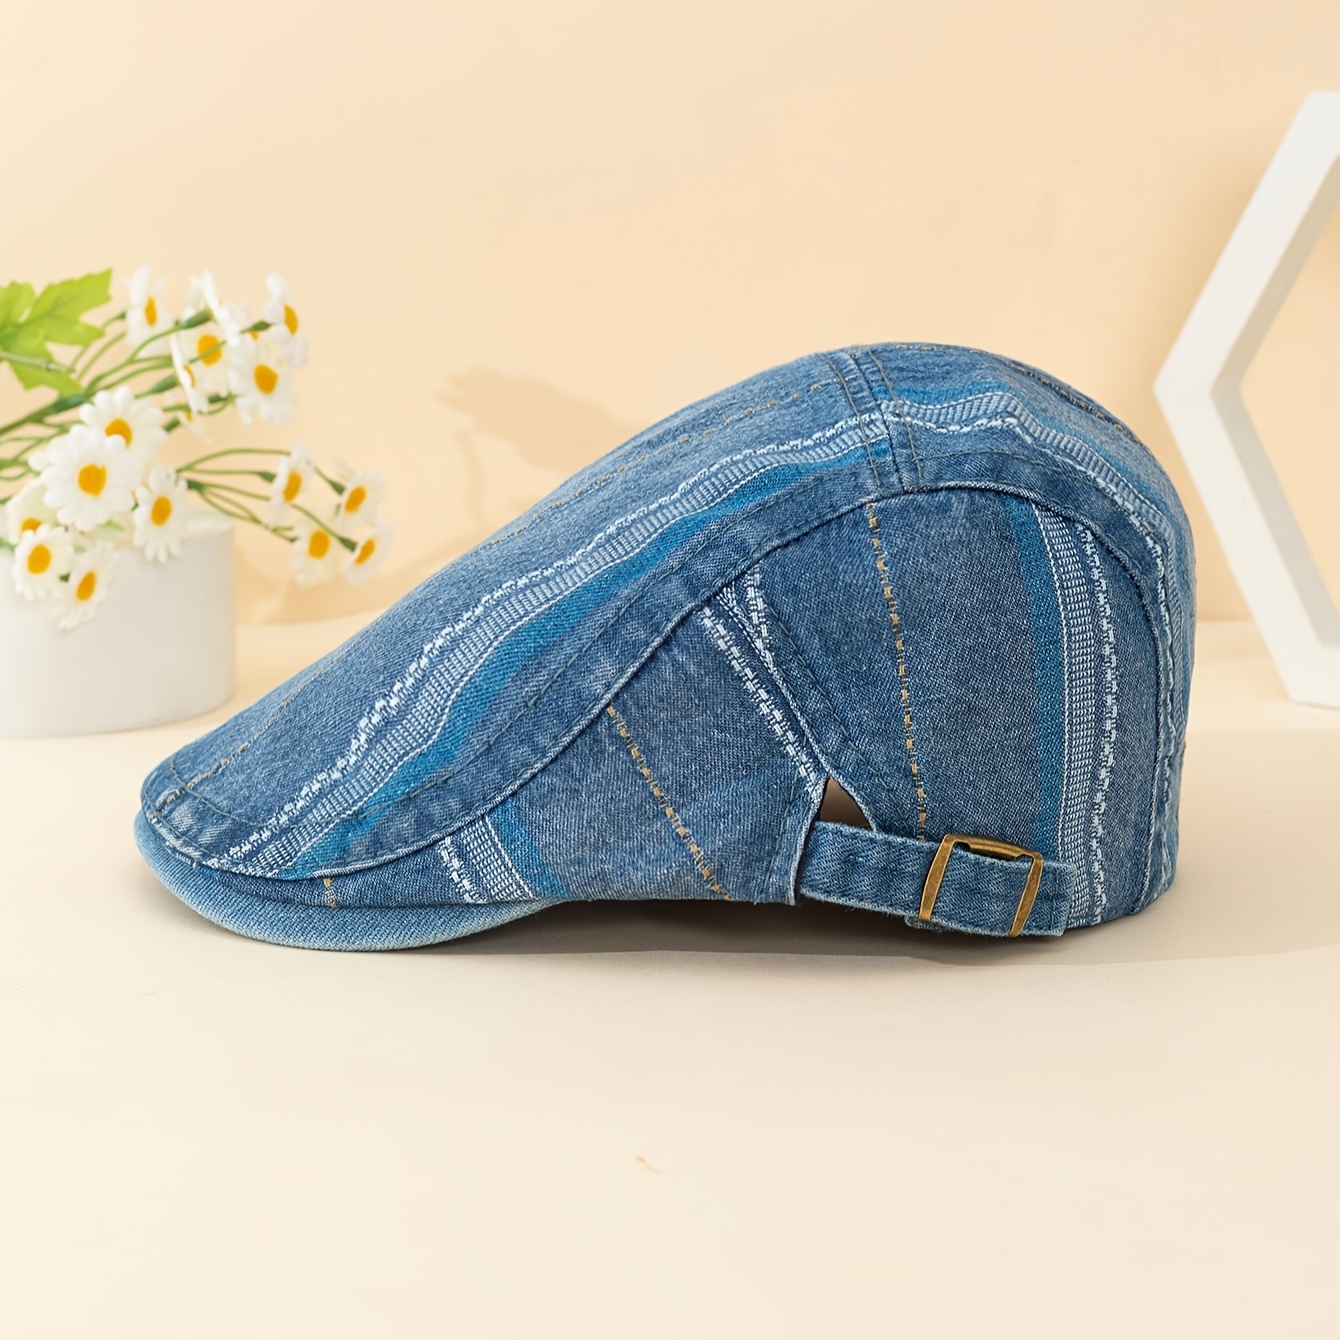 1pc Unisex Teenagers' Vintage Style Washed Denim Fabric Brimmed